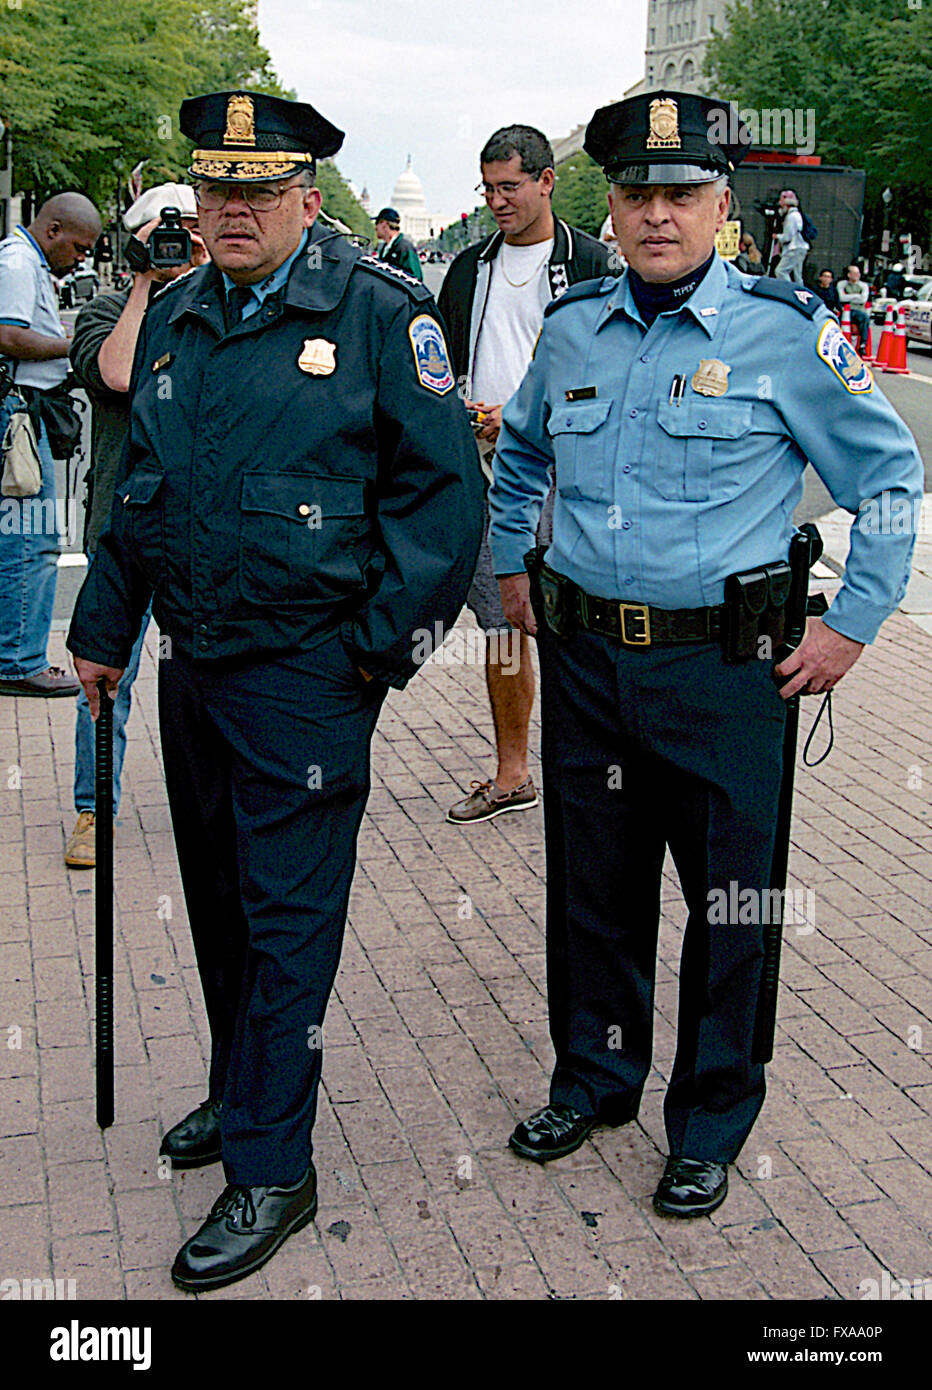 Washington, DC., USA, 20th April, 2002 Immigration rights protest march  in Washington DC.  DC. police Chief Charles Ramsey carrying his riot stick and his Public information officer, Sergeant Joe Gentile observe the action during a immigration rights march. Credit: Mark Reinstein Stock Photo